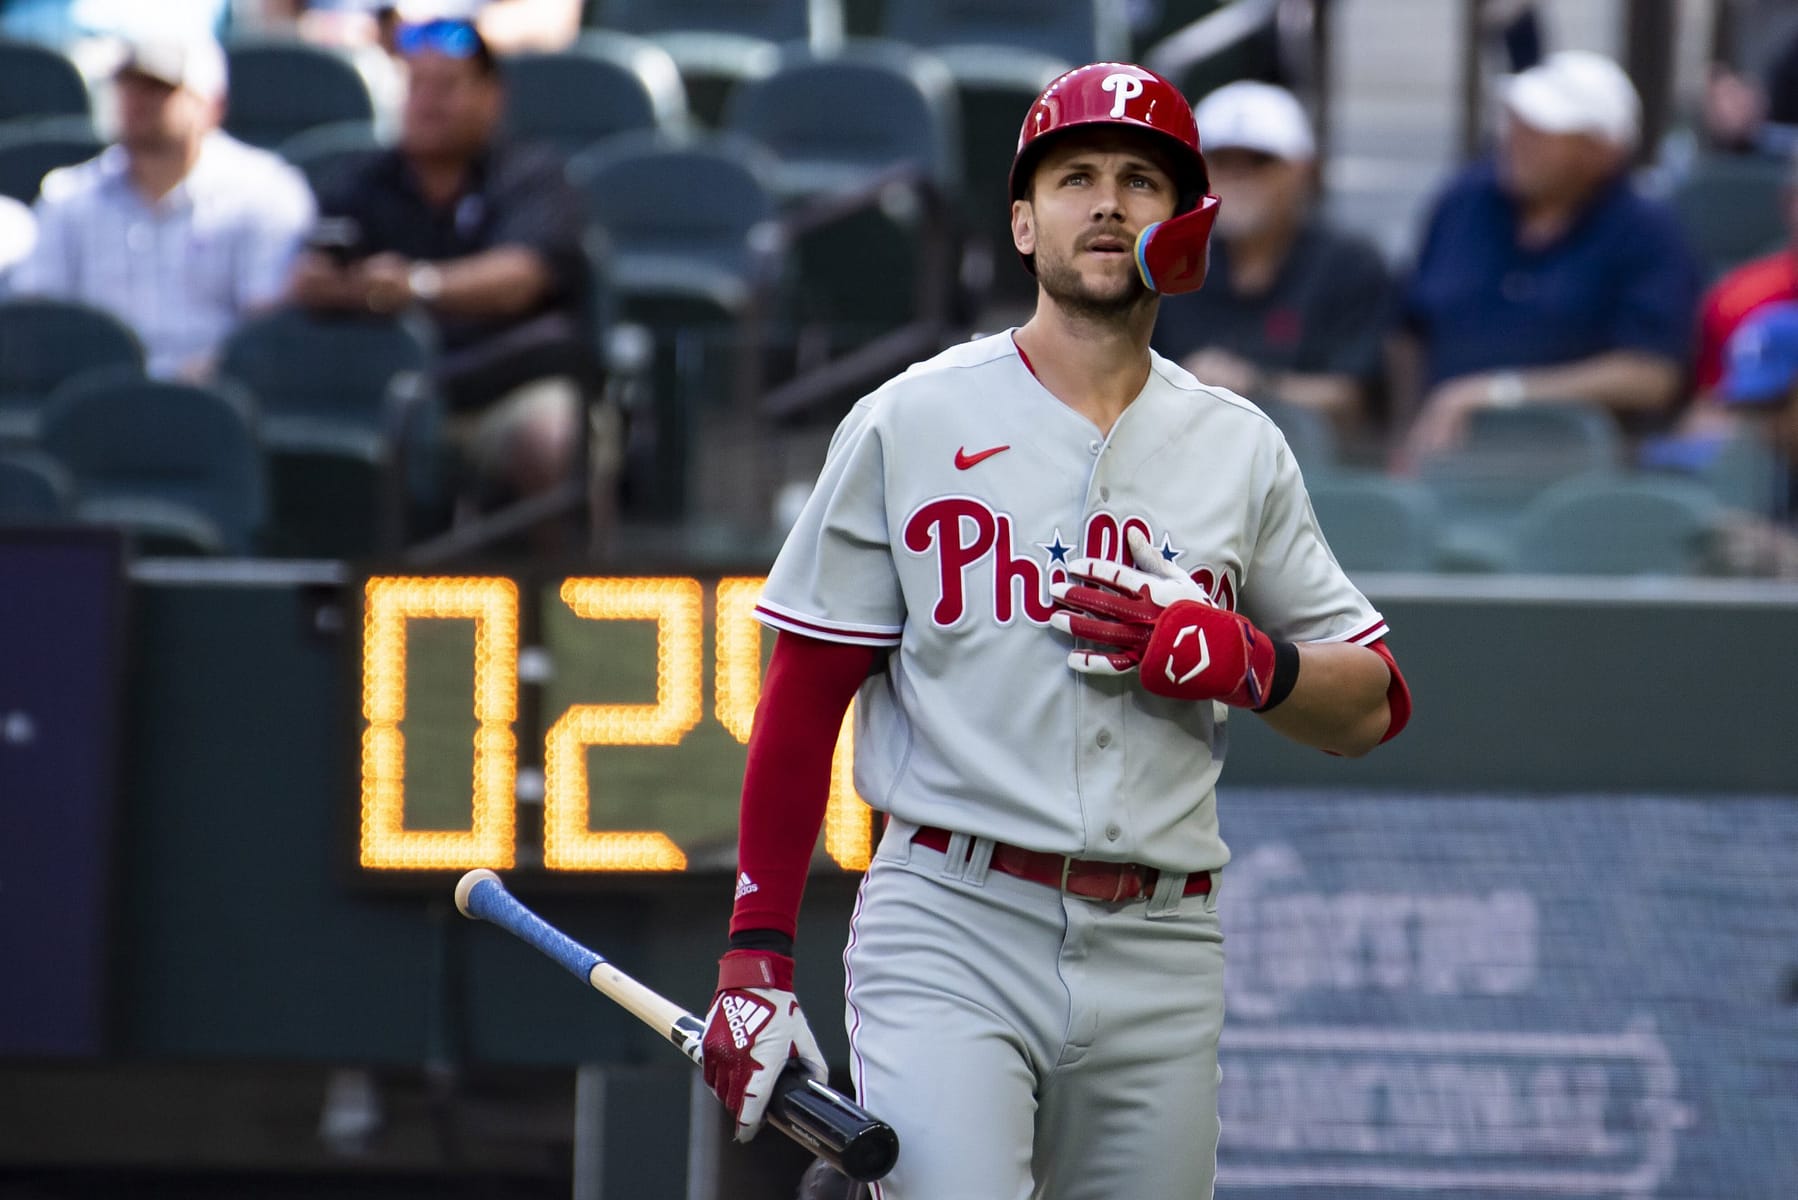 The best PrizePicks MLB player projection picks for your entry tonight include Trae Turner, who takes on the Mets, and Bryan Reynolds...